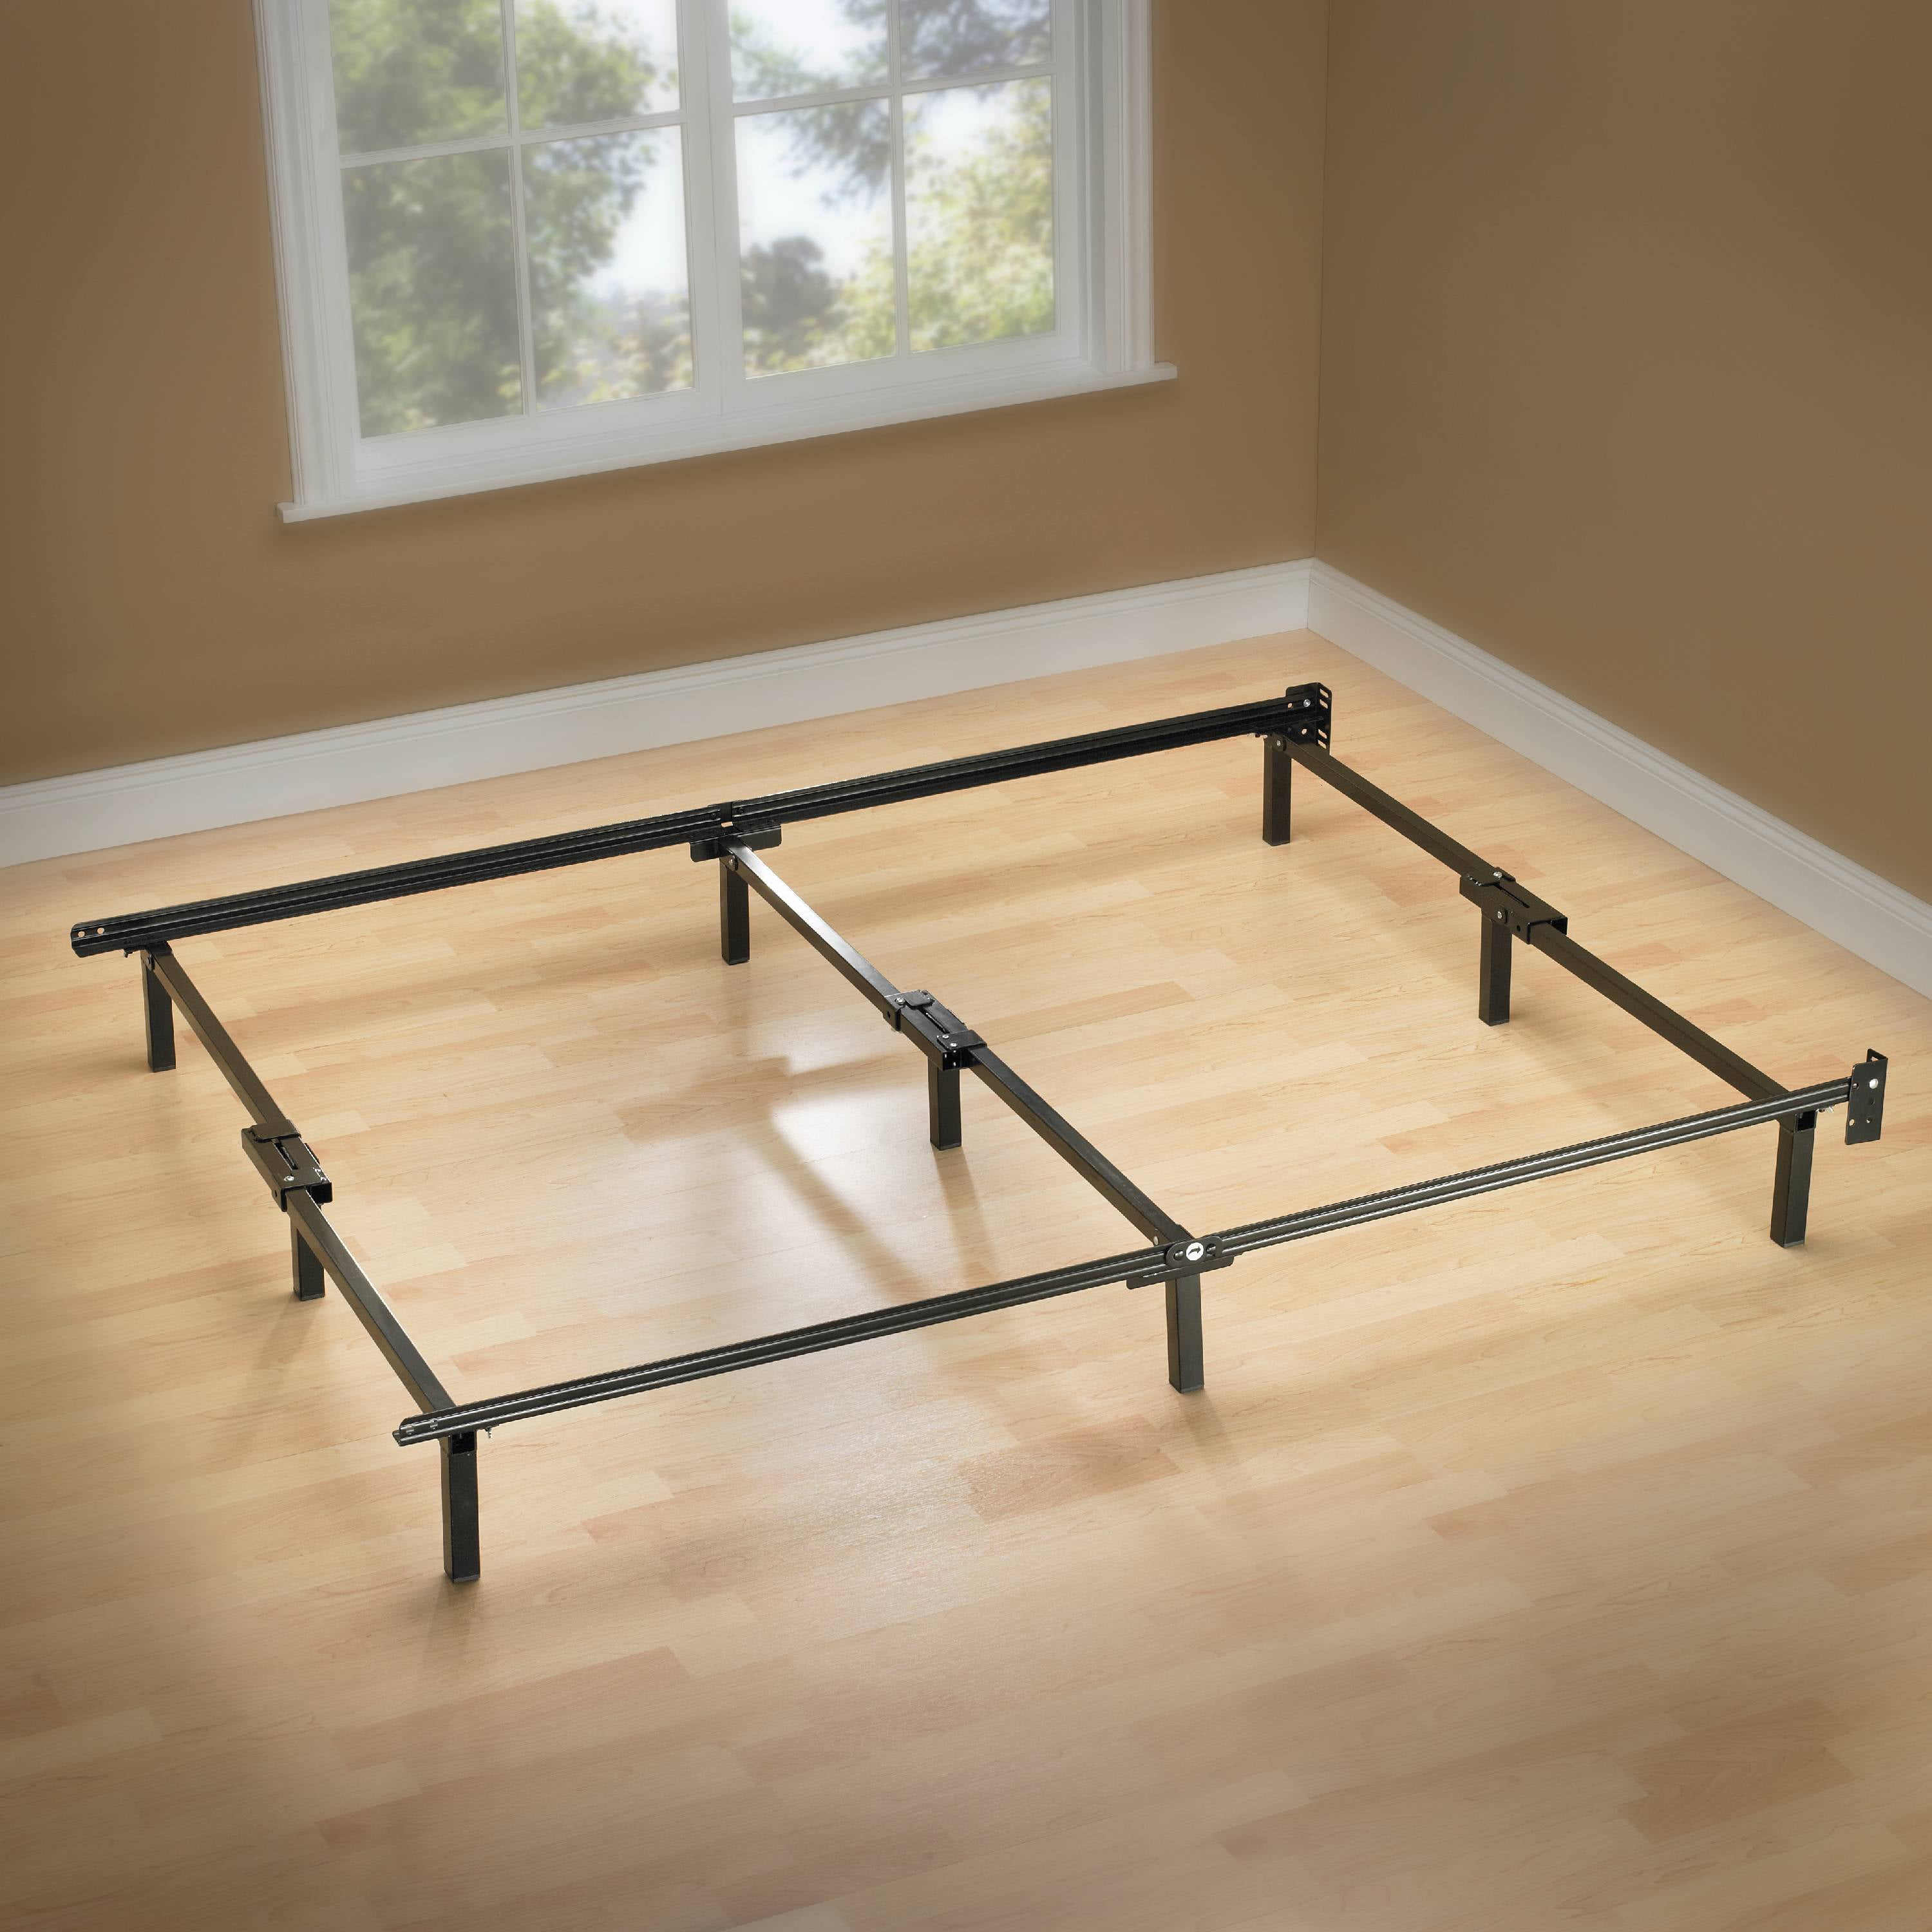 Details about   Mainstays 7" Adjustable Bed Frame Black Steel Twin Queen Full King Size 